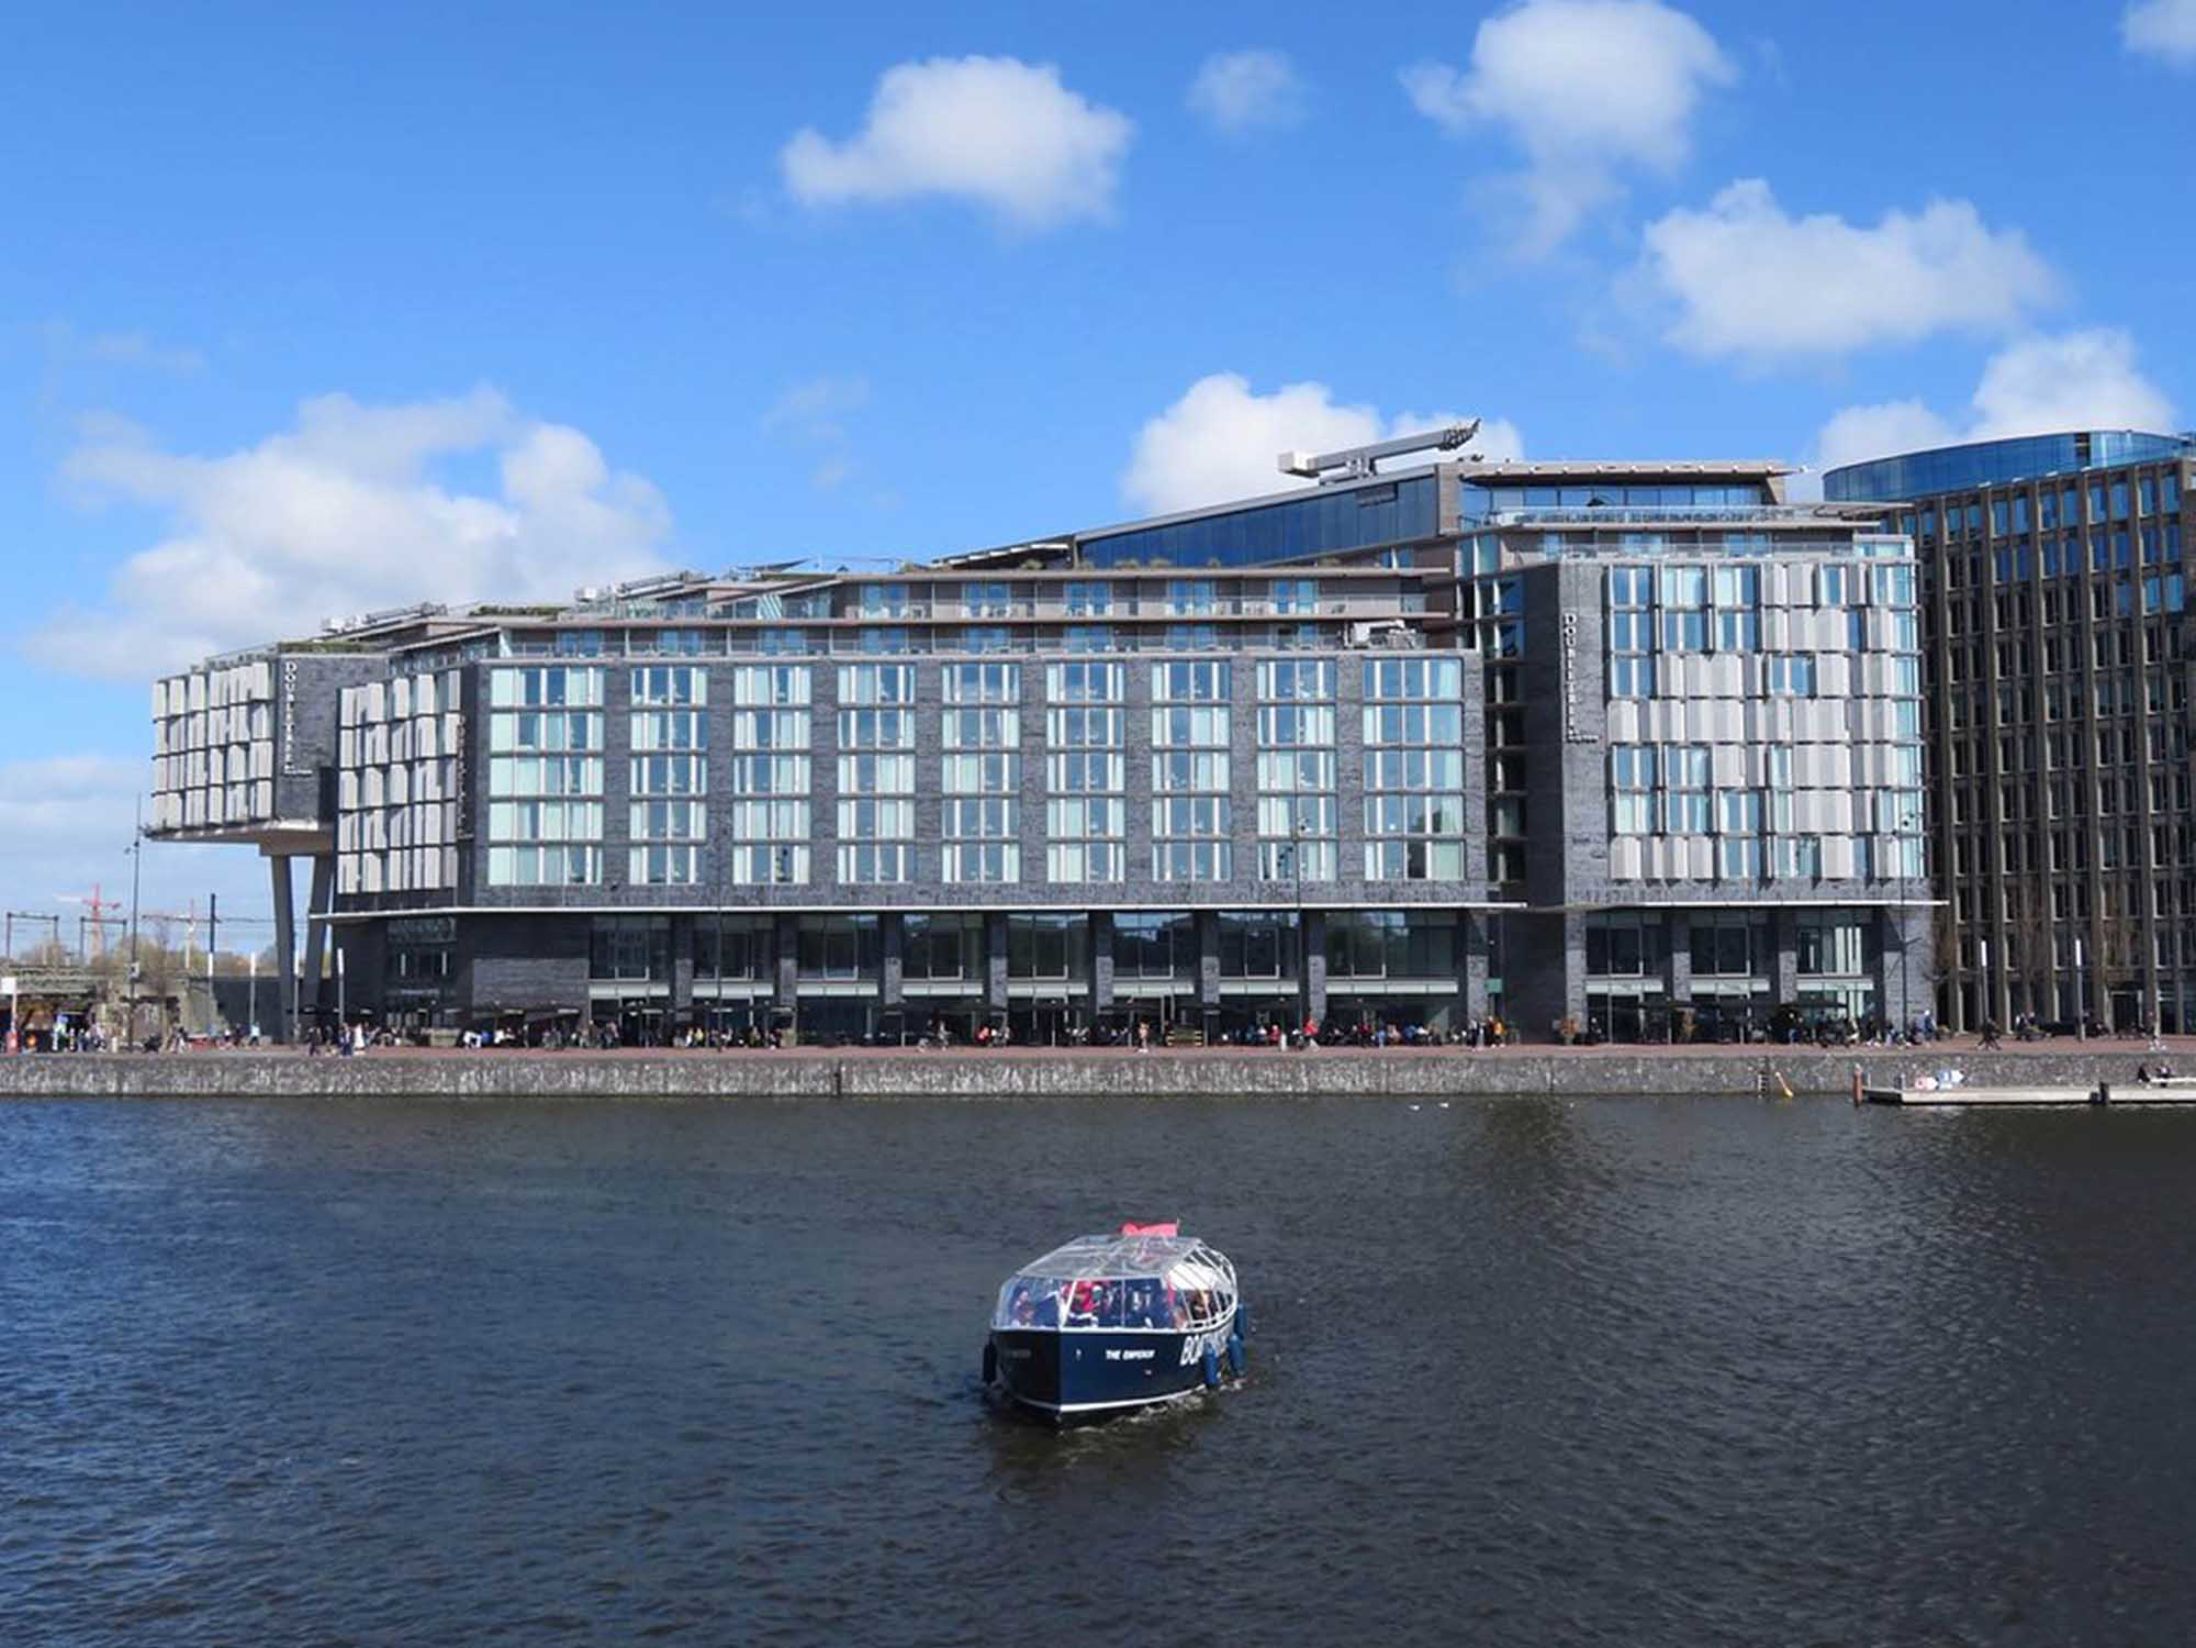 Best Hotels in Amsterdam - DoubleTree by Hilton Amsterdam Centraal Station